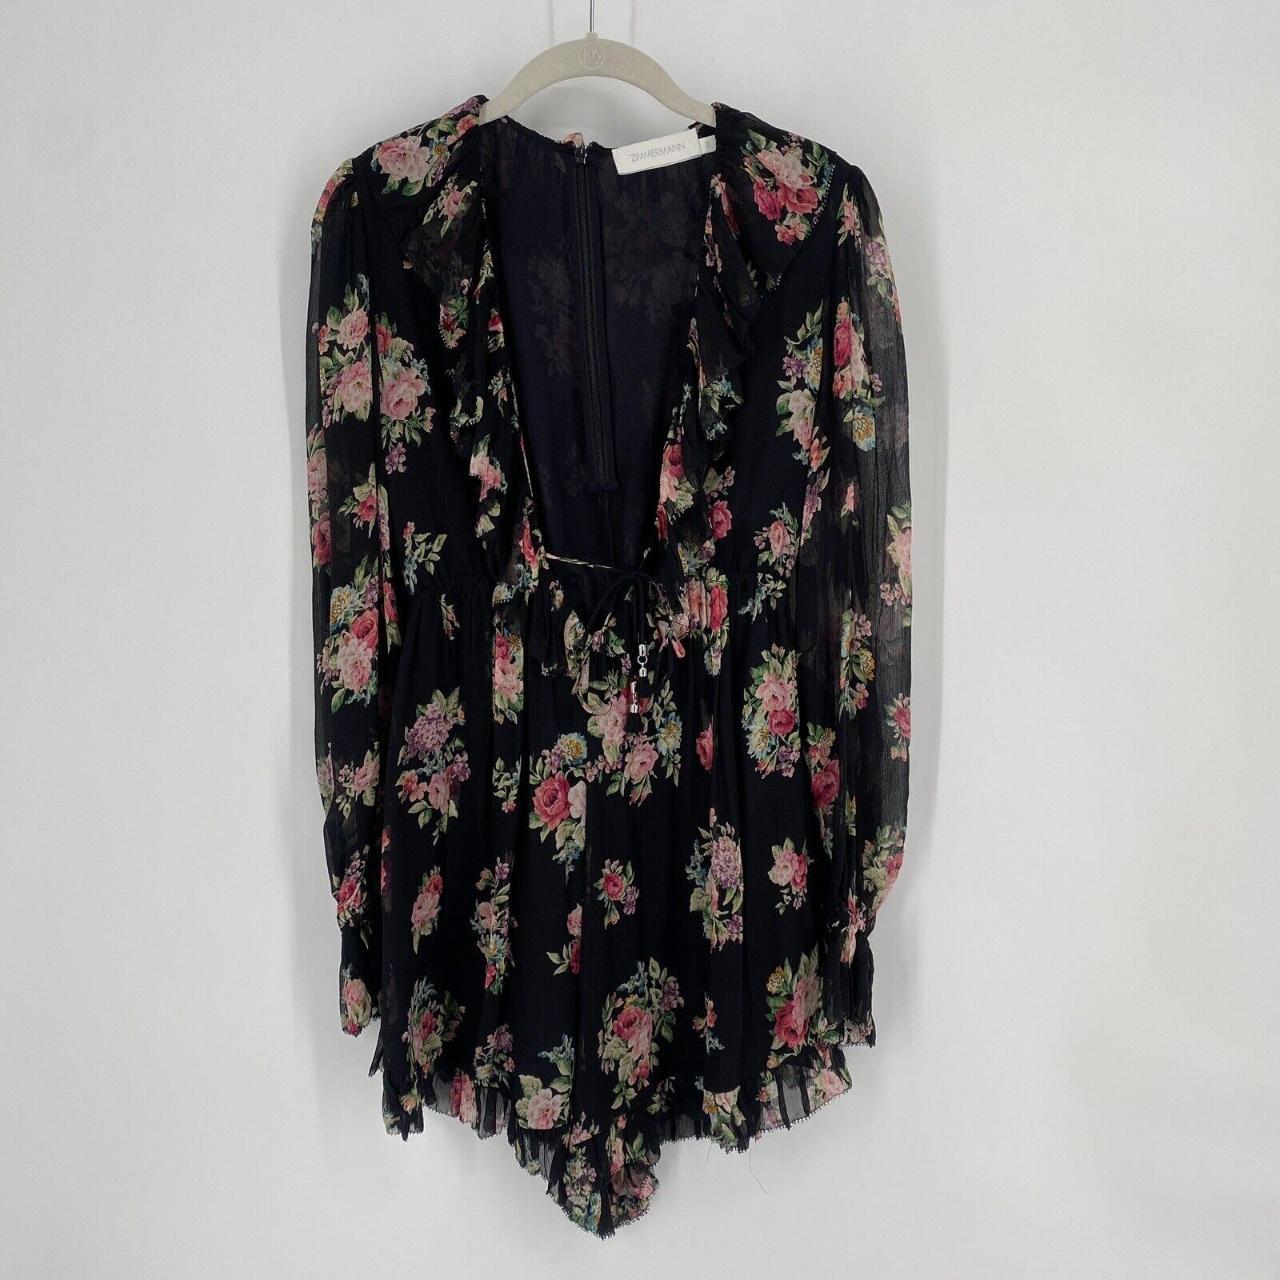 item listed by thecanarycloset